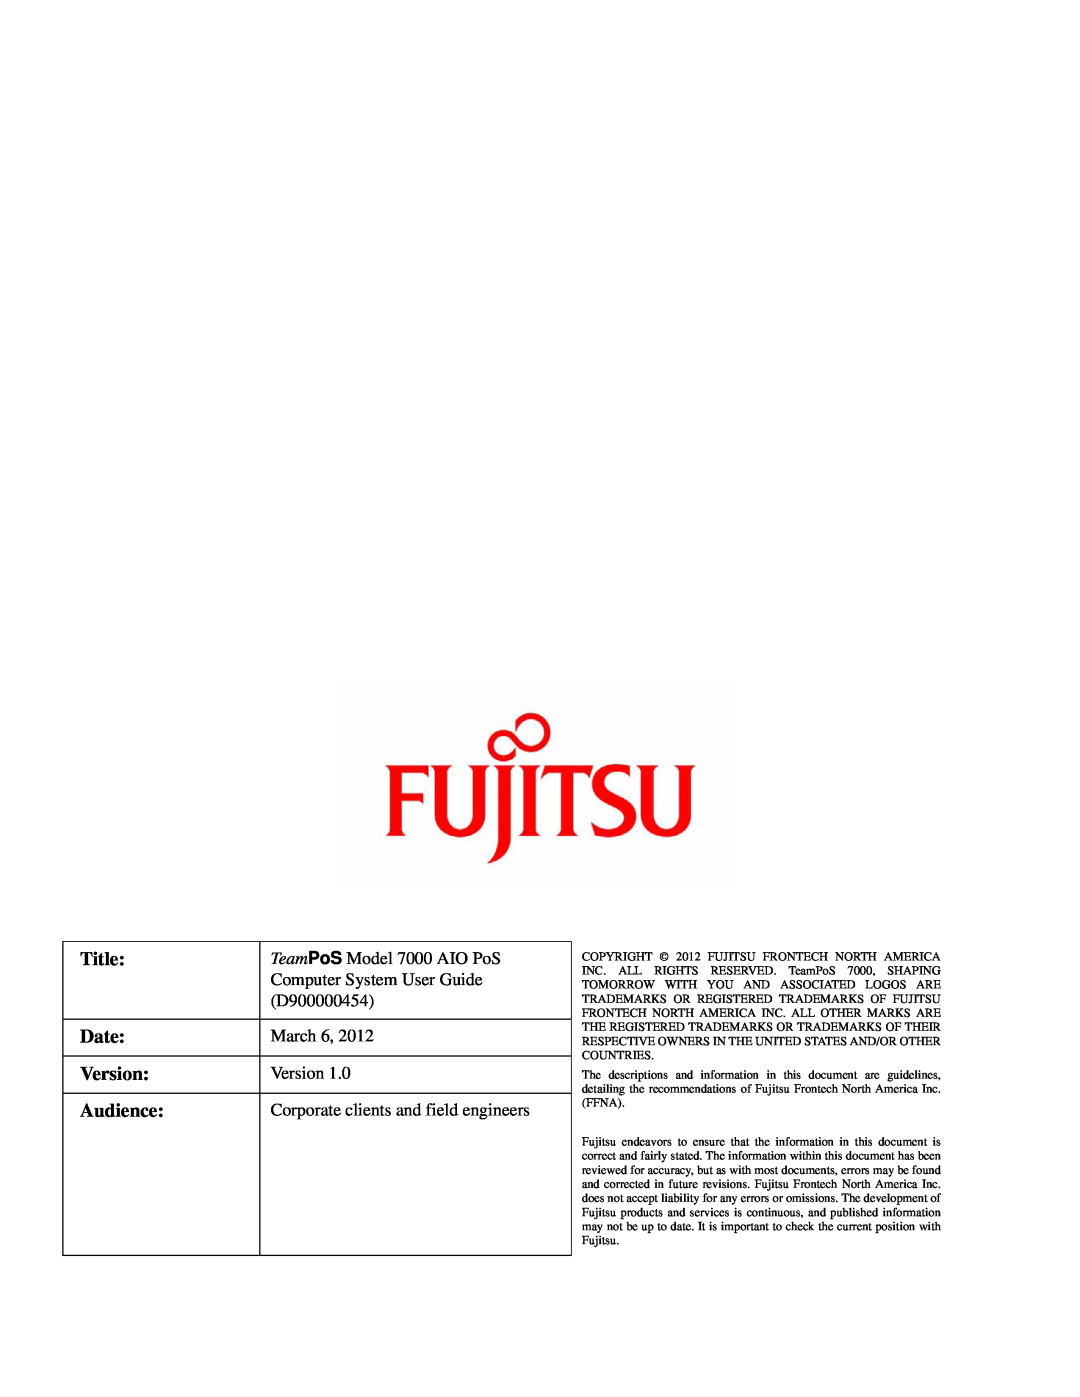 Fujitsu Title, Date, Version, Audience, TeamPoS Model 7000 AIO PoS, Computer System User Guide, D900000454, March 6 